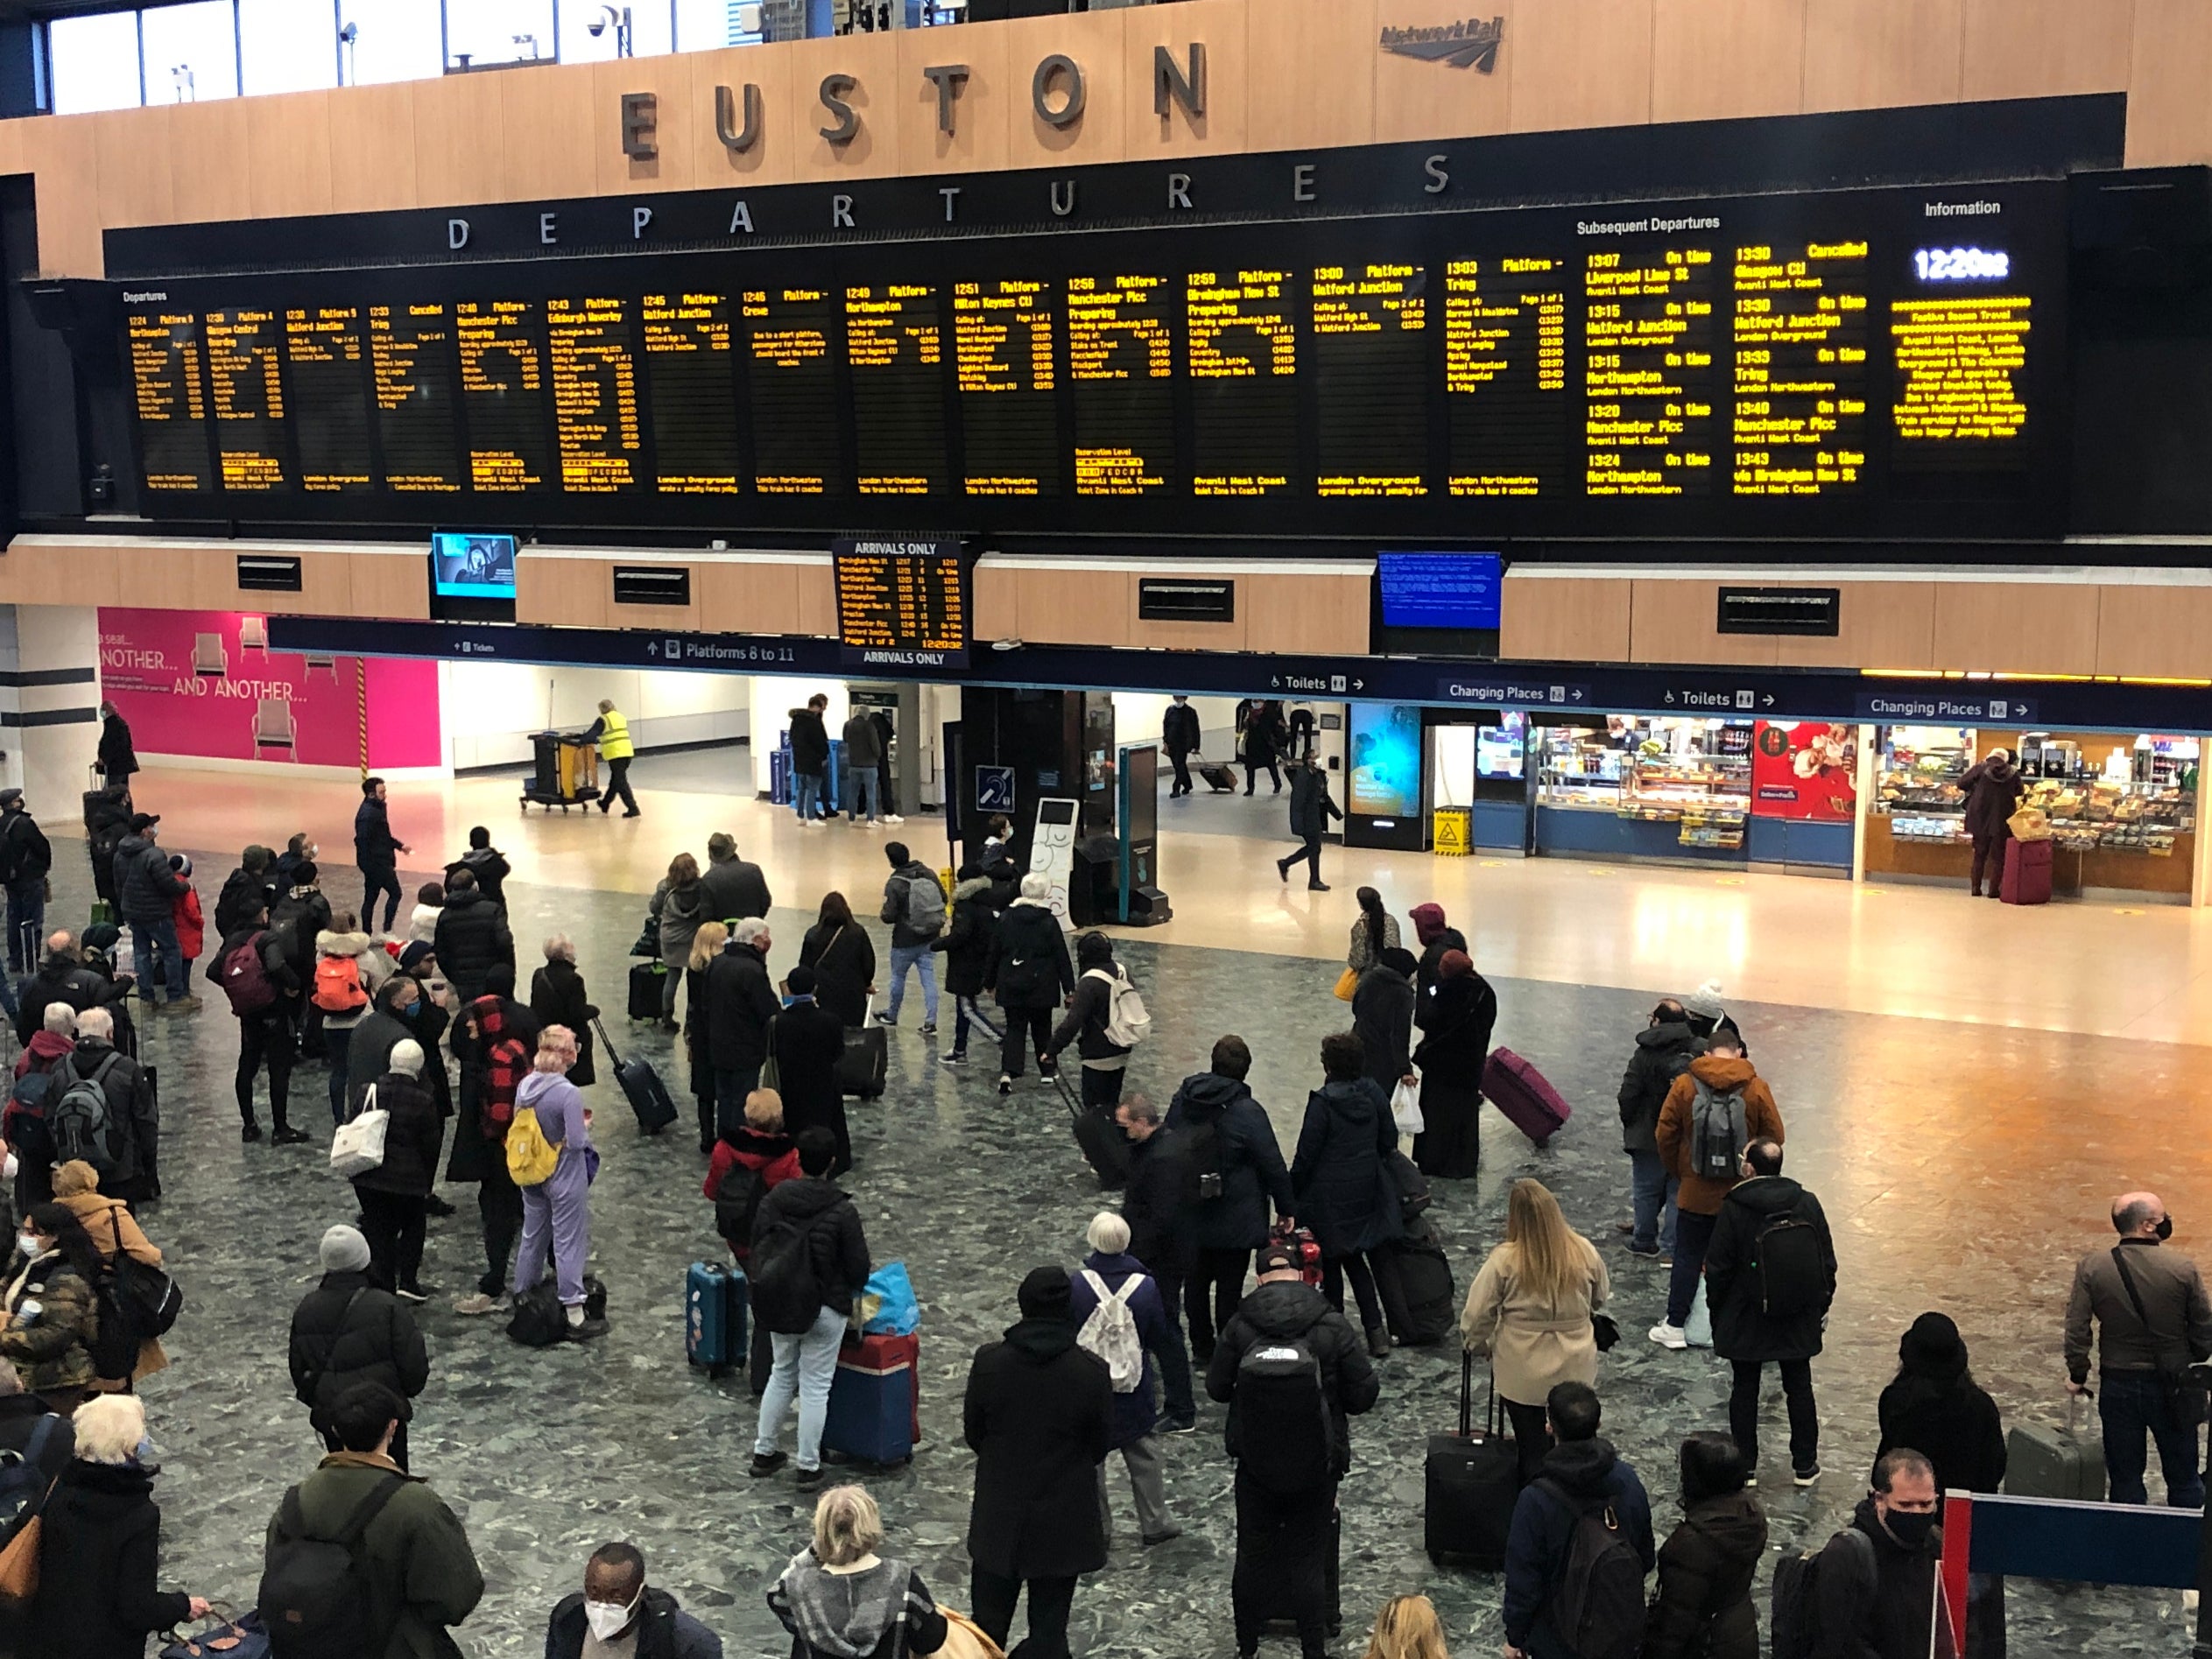 Closing soon: London Euston will see no trains over the full Easter weekend